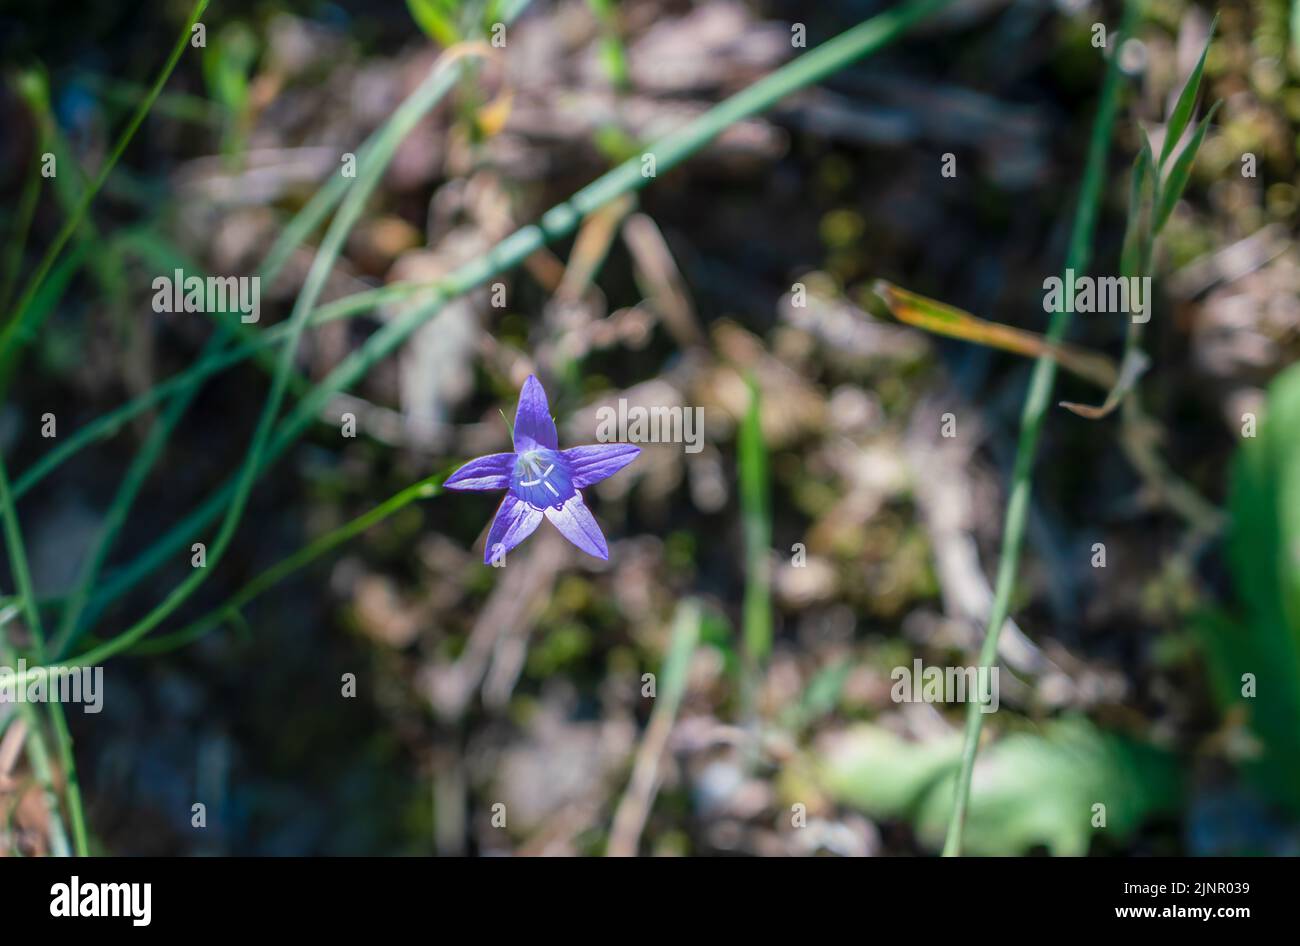 detailed close up of a Royal bluebell (Wahlenbergia gloriosa) Stock Photo